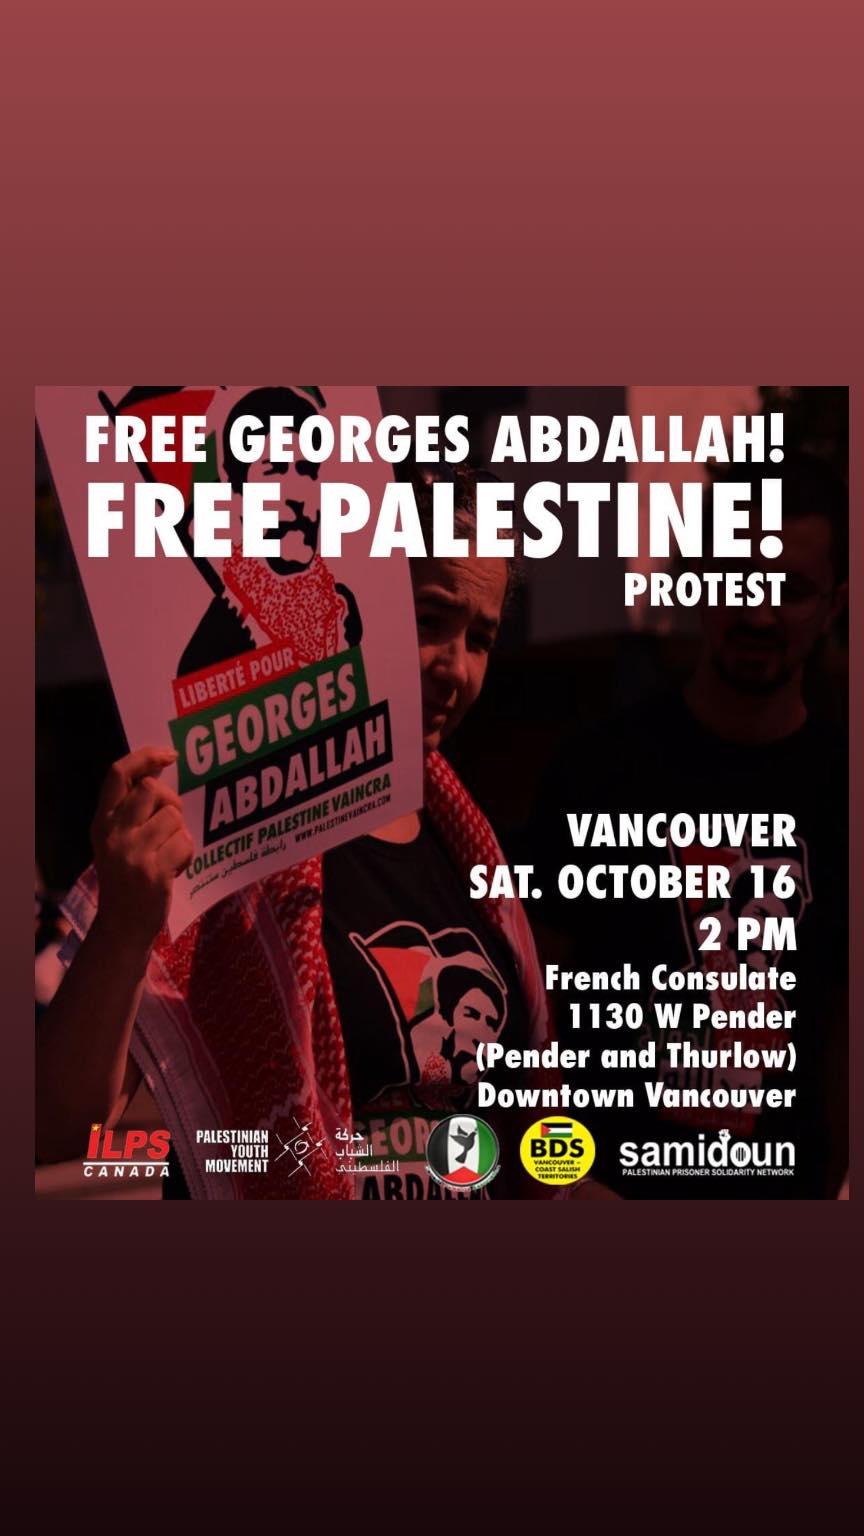 Free Georges Abdallah! Free Palestine Protest in Vancouver!